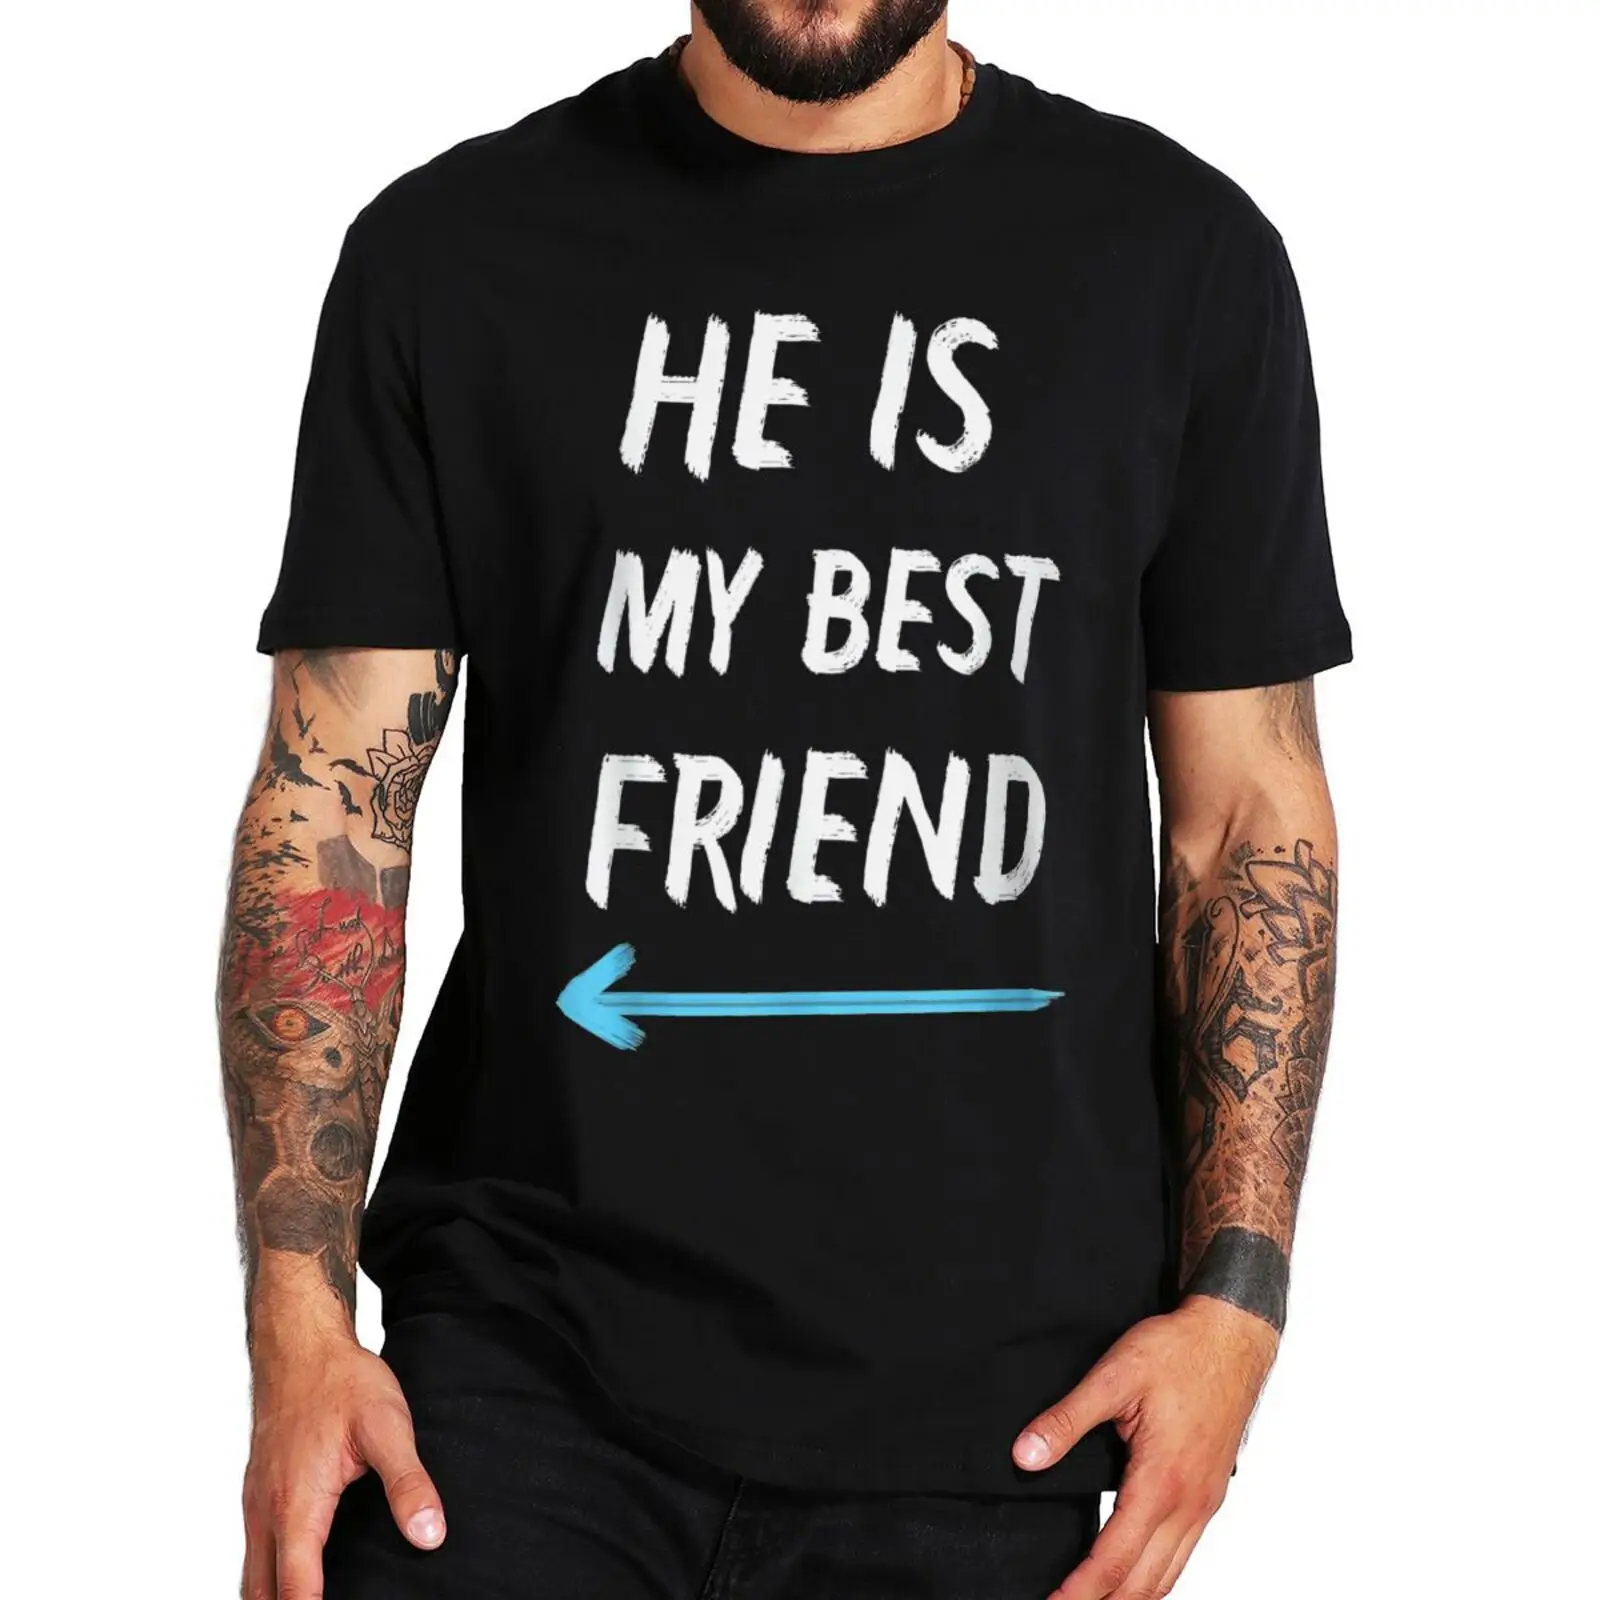 

He Is My Best Friend T Shirt Funny Friendship Design Humor Sayings Jokes Gift Tee Tops Summer Casual Unisex T-shirts